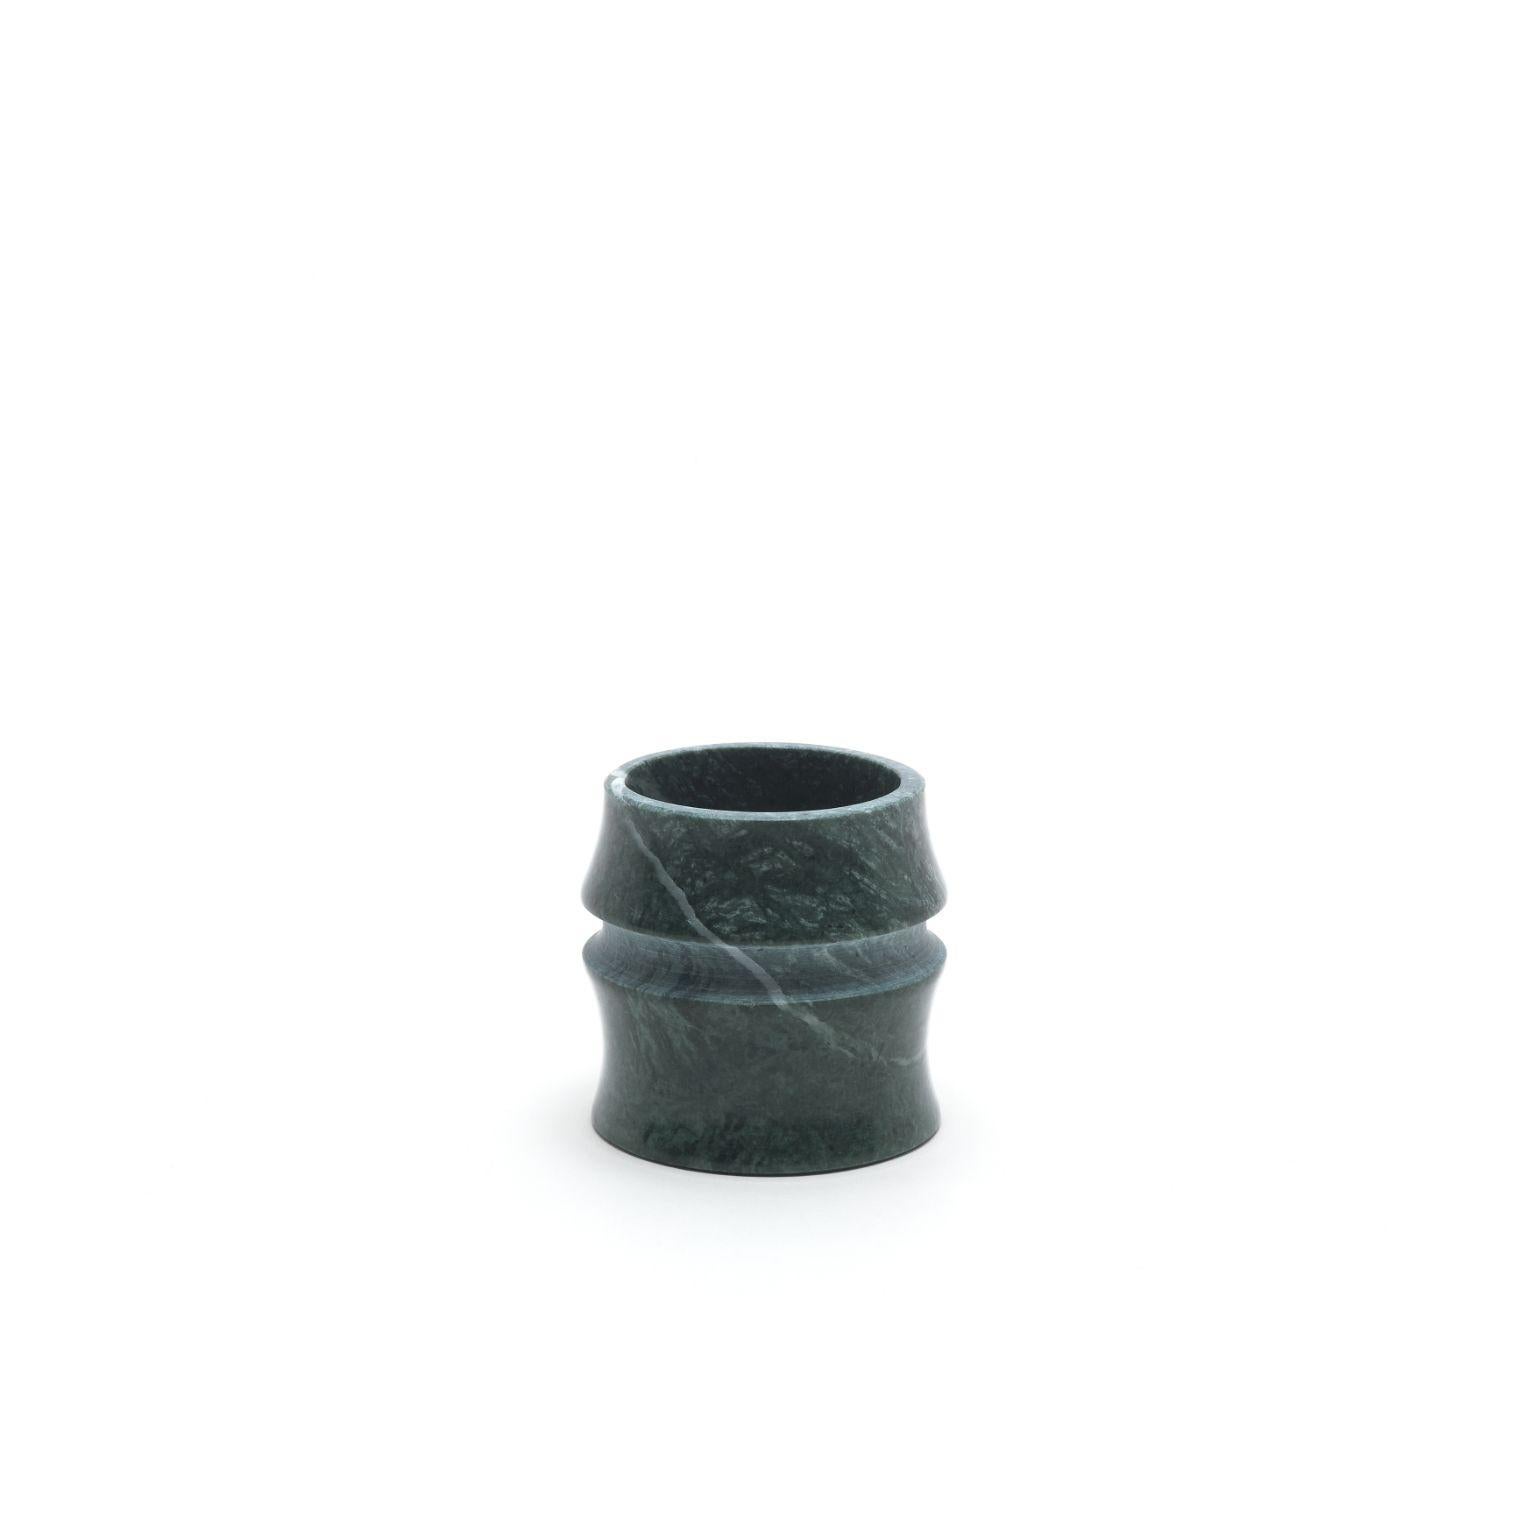 Tokkuri set by Michele Chiossi
Jap Vegetation Collection
Dimensions: 6.5 x 13 cm (Tokkuri), 5.5 x 6 (Cup)
Materials: Verde Guatemala

A zigzag line defines the illusory border between art and design. Chiossi crosses it entirely by creating a